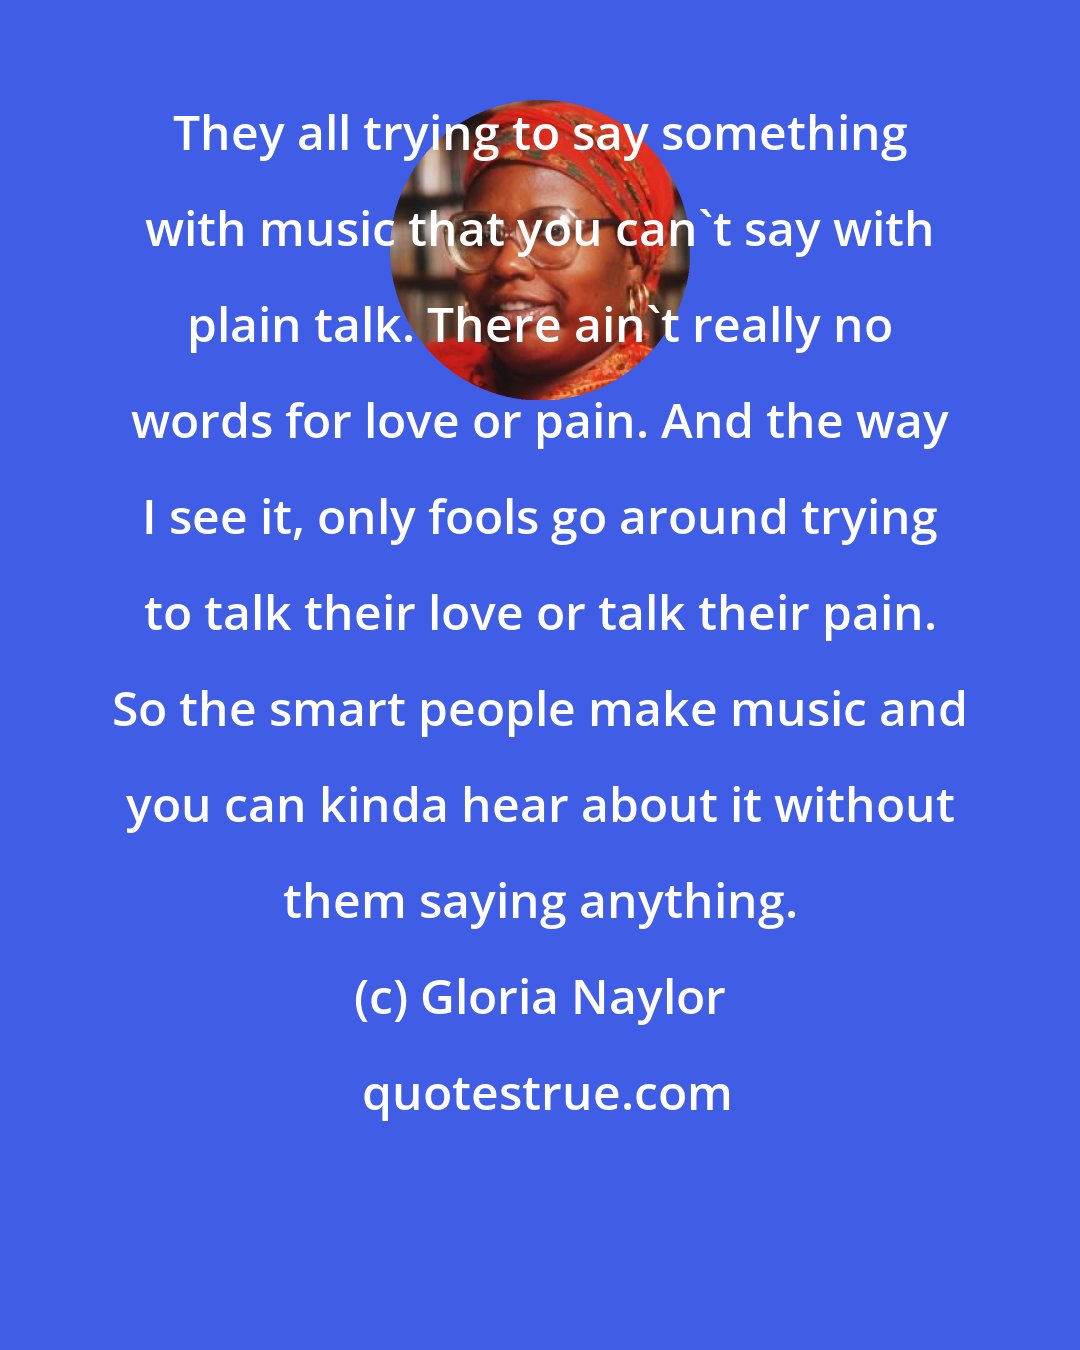 Gloria Naylor: They all trying to say something with music that you can't say with plain talk. There ain't really no words for love or pain. And the way I see it, only fools go around trying to talk their love or talk their pain. So the smart people make music and you can kinda hear about it without them saying anything.